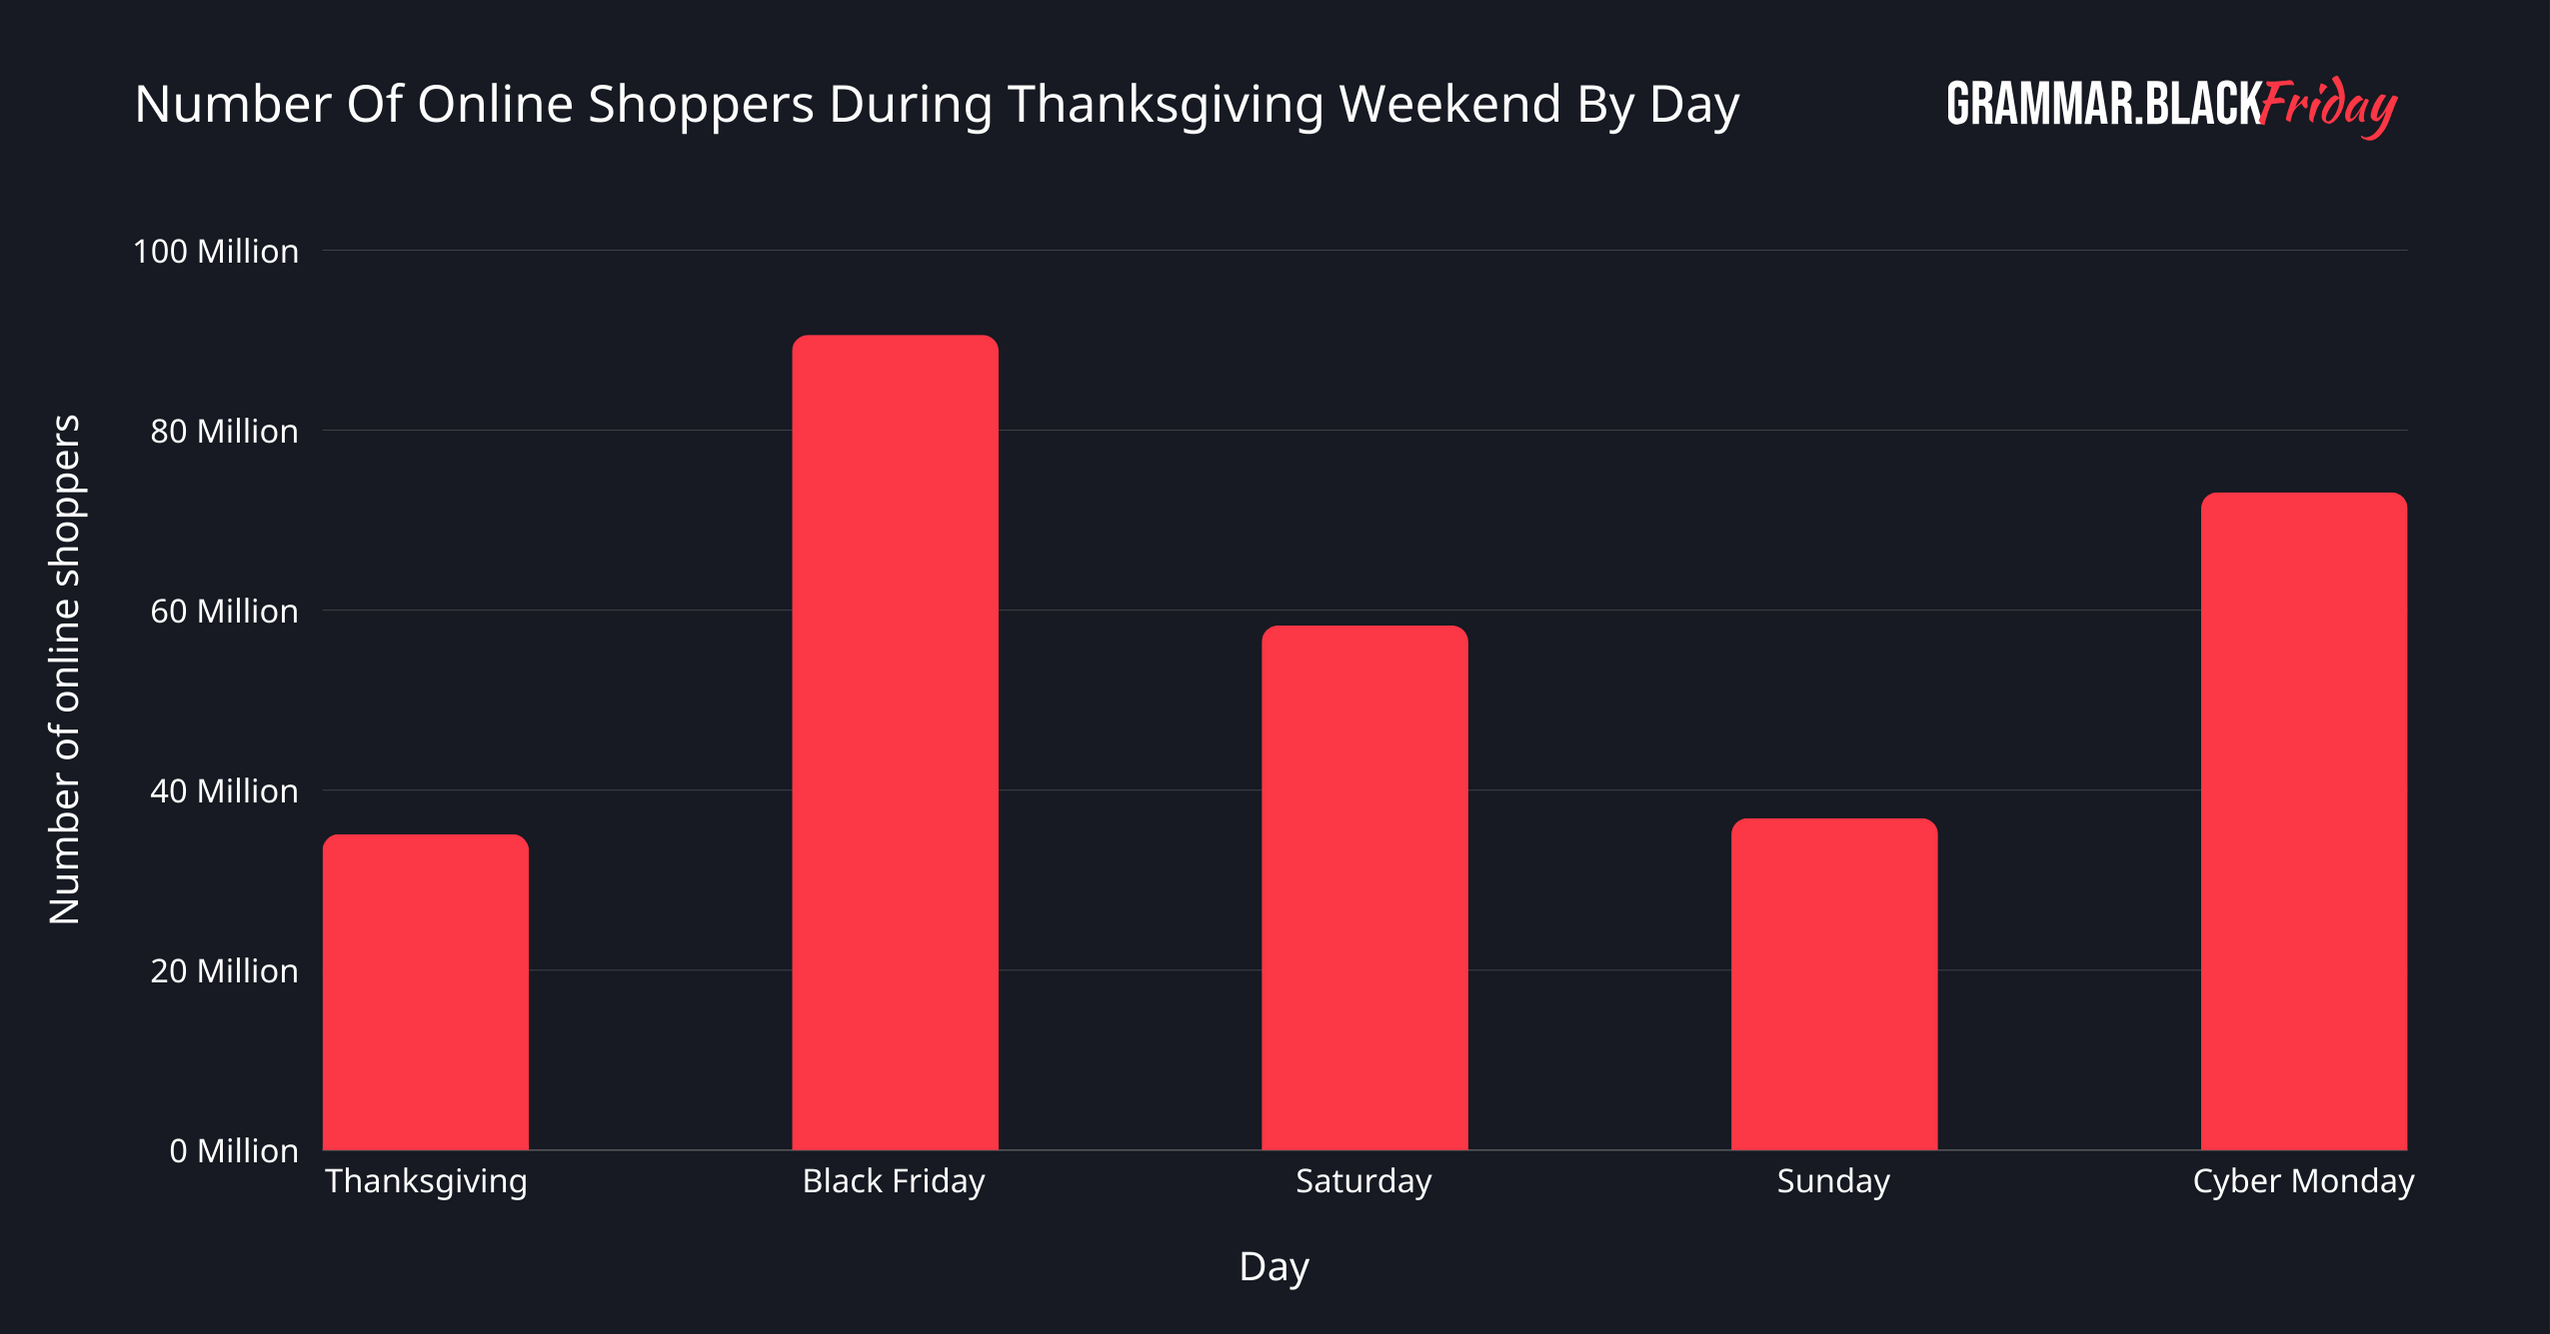 Number Of Online Shoppers During Thanksgiving 